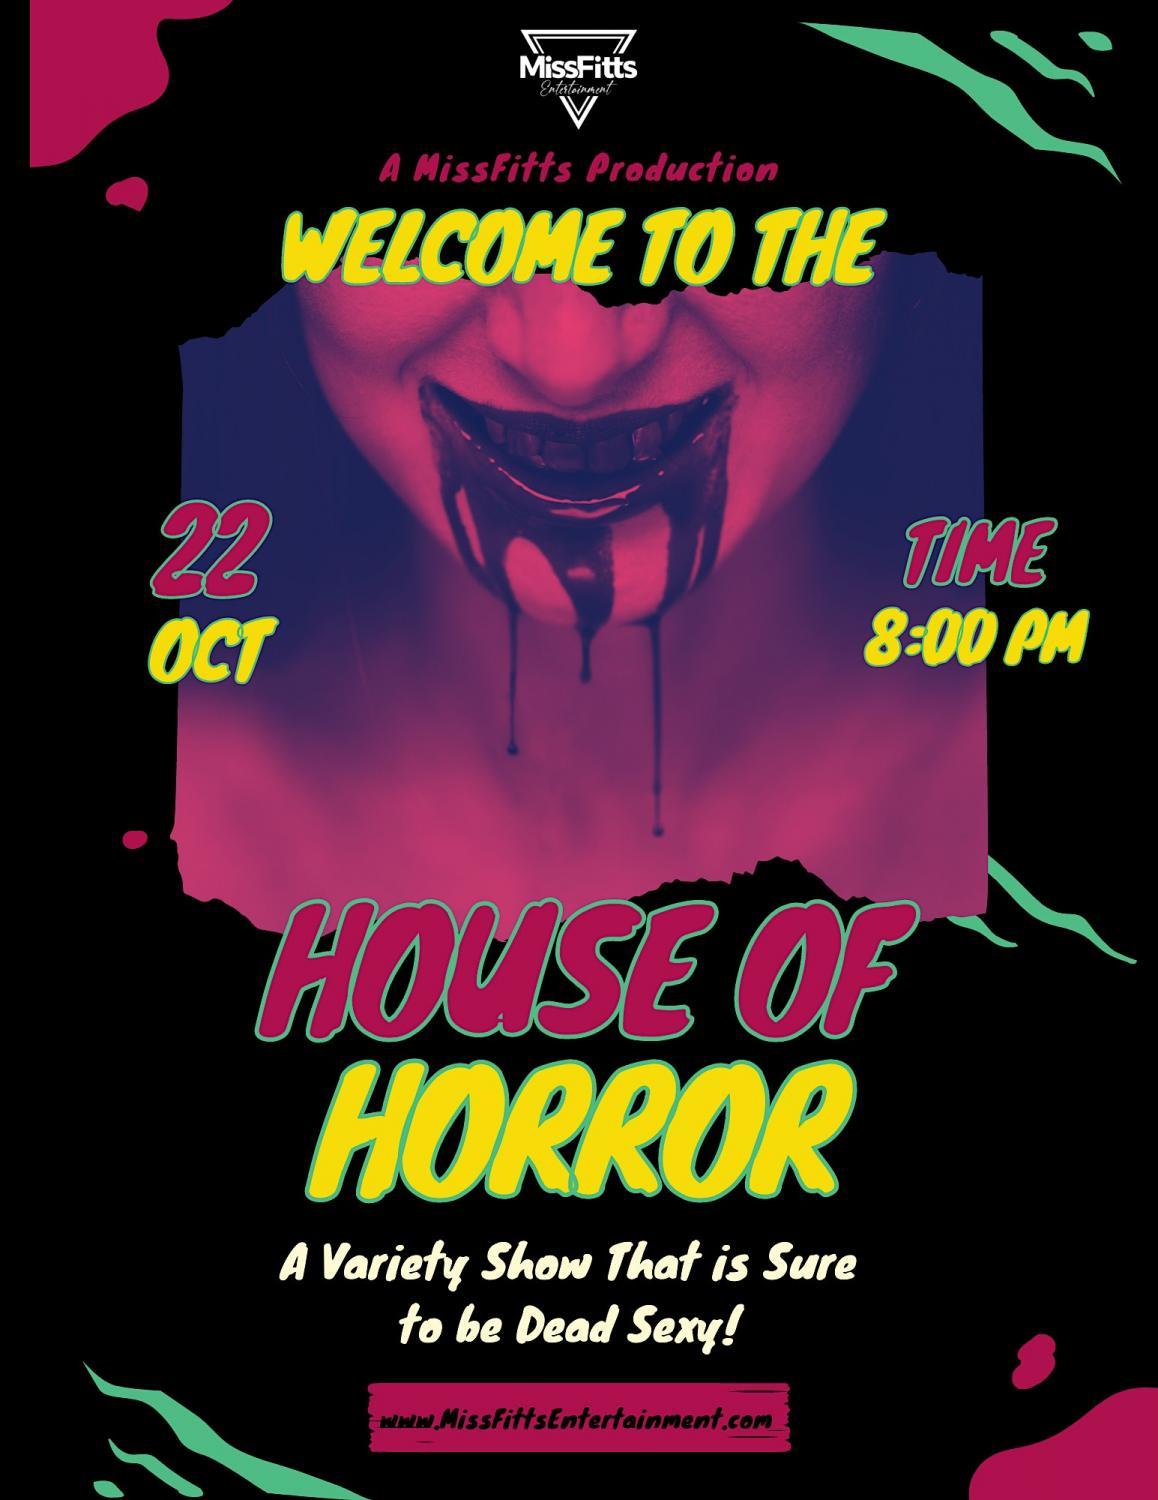 MissFitt's House of Horror, A Halloween Special
Sat Oct 22, 7:00 PM - Sat Oct 22, 7:00 PM
in 3 days